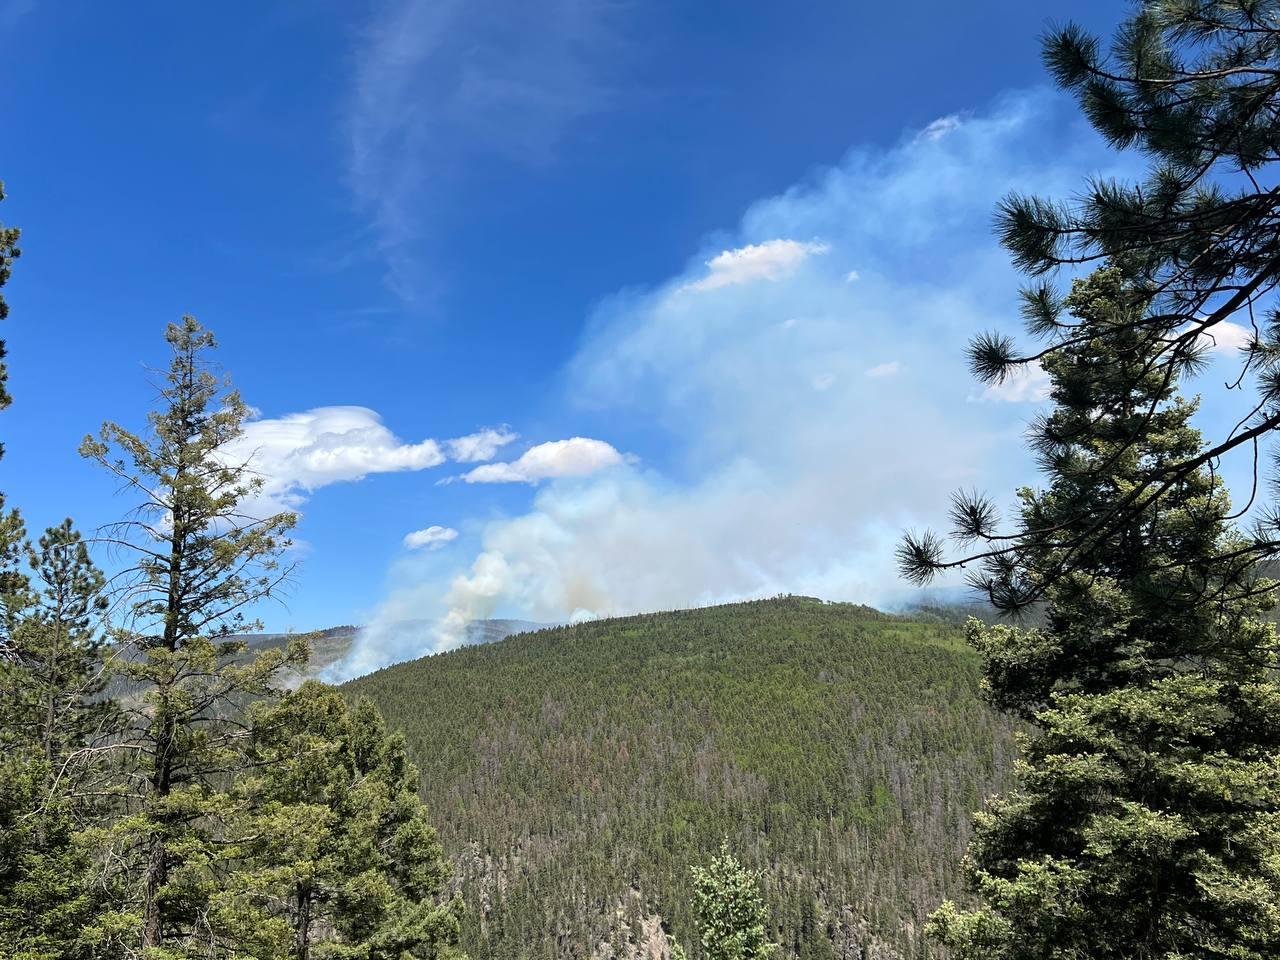 Large landscape covered in trees along mountain side.  Smoke rises from behind ridgeline against blue sky.